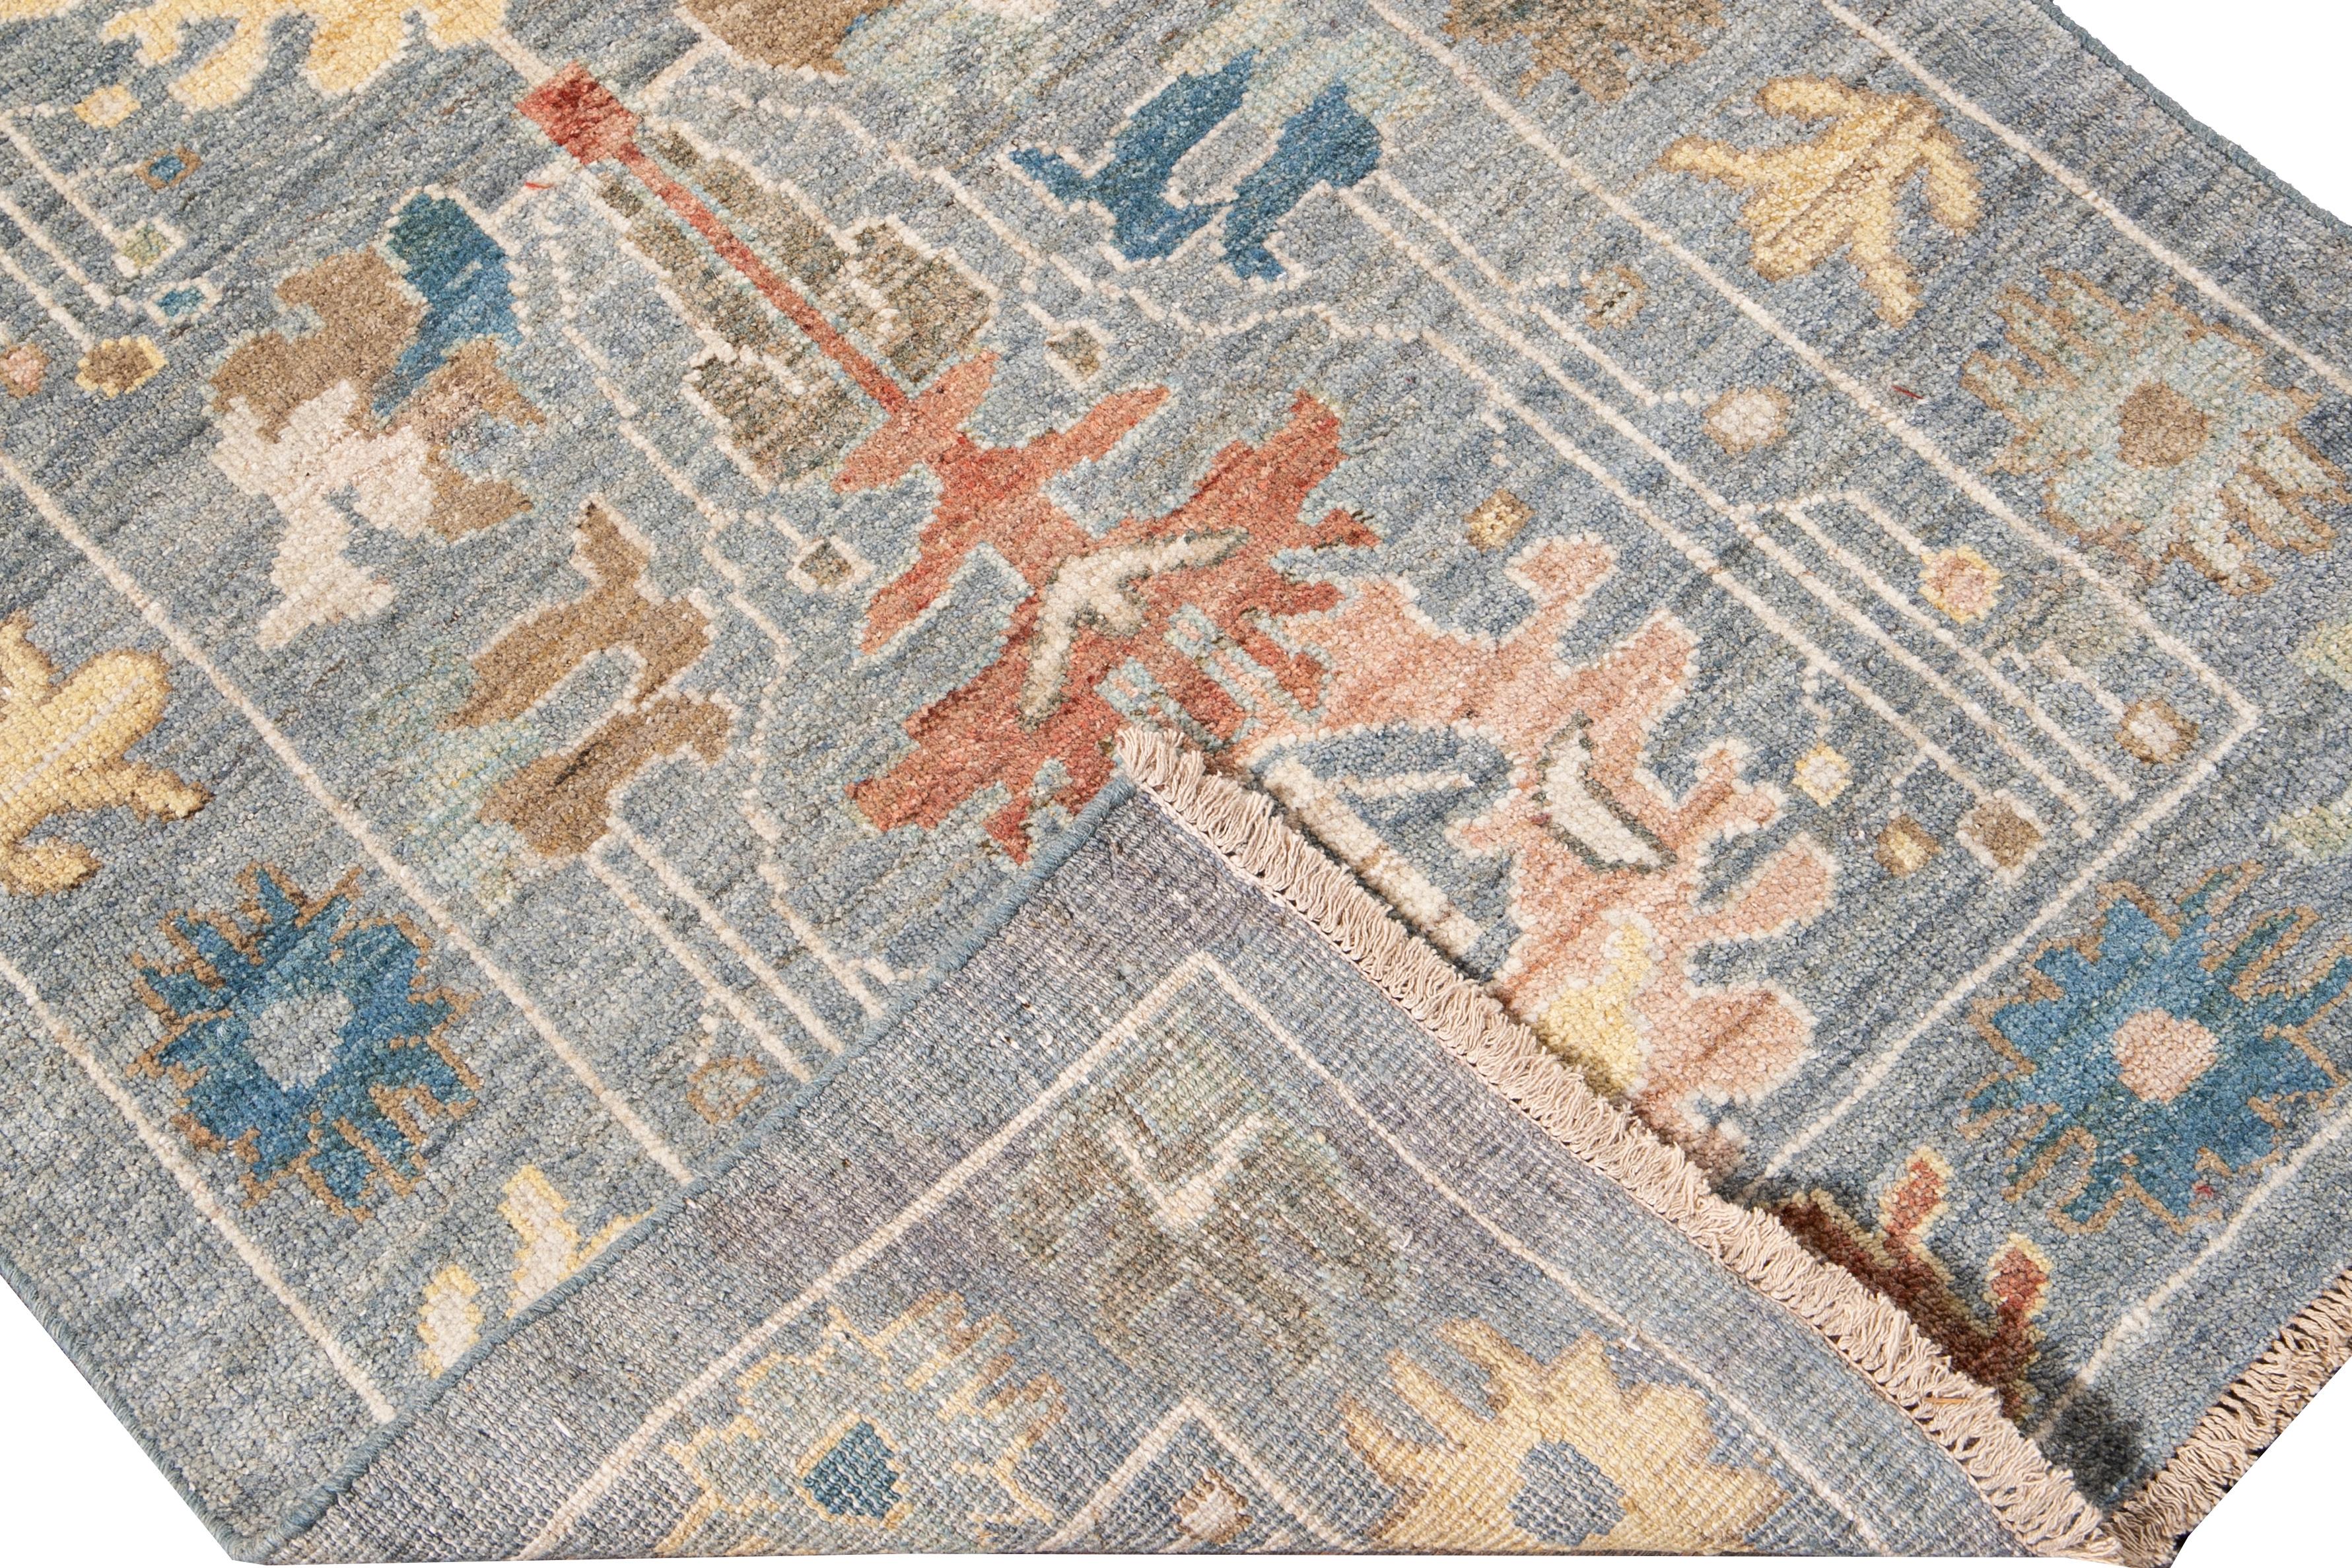 Beautiful modern Sultanabad hand-knotted wool runner with a blue field. This Sultanabad runner has a yellow, green, orange, and brown accent in a gorgeous all-over Classic floral design.

This rug measures: 2'10